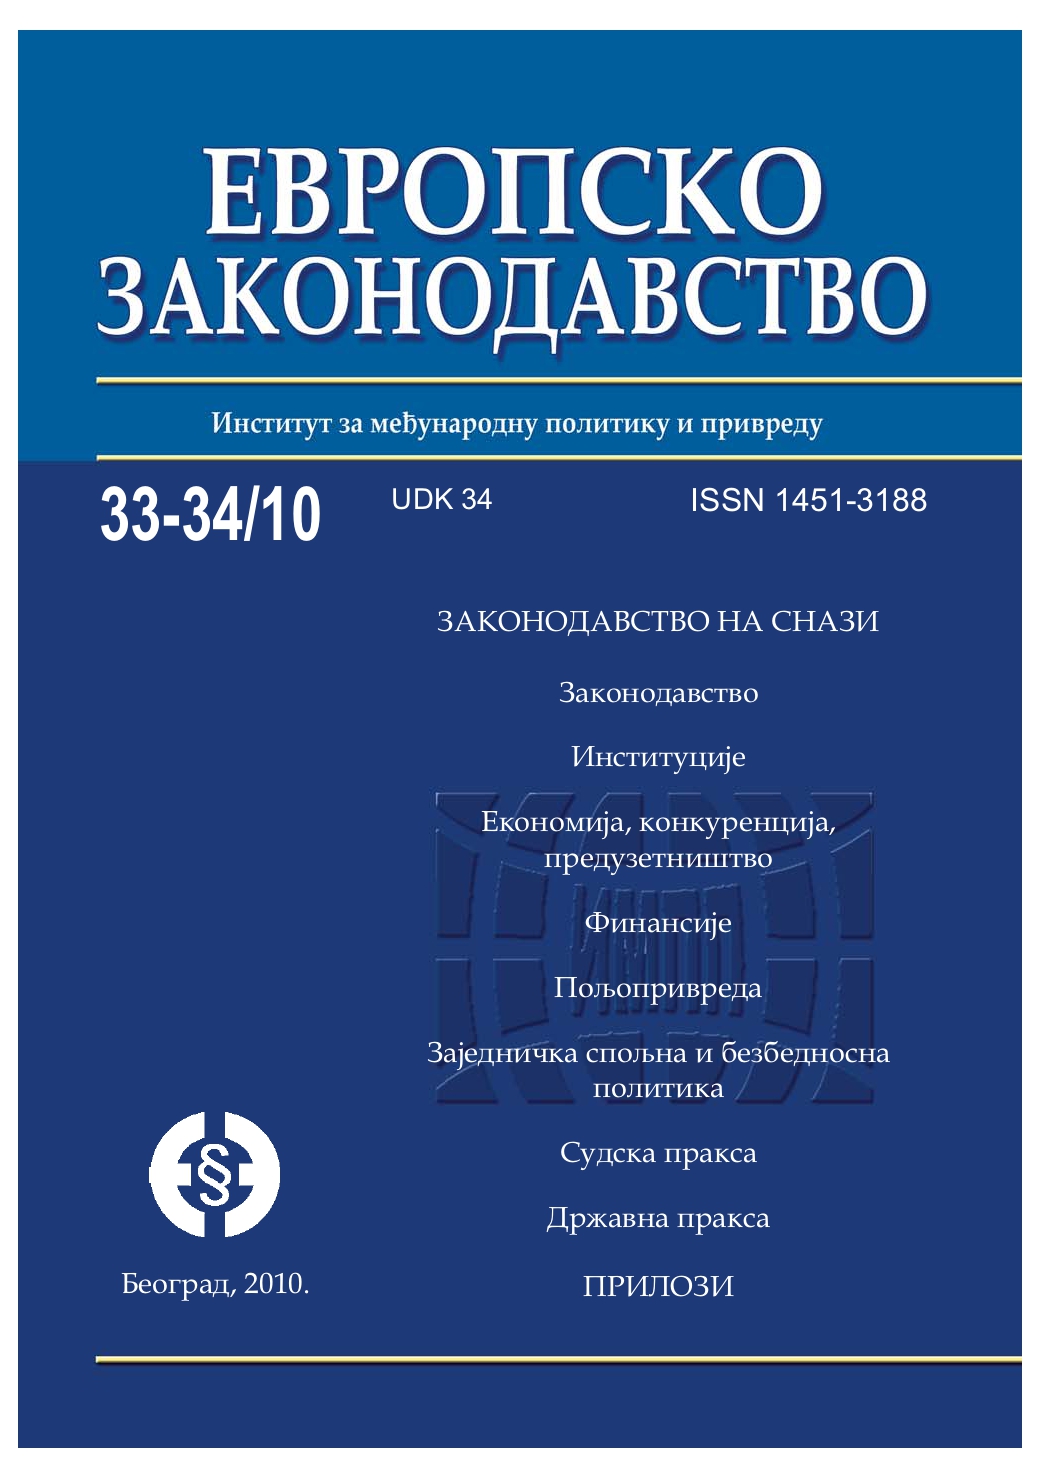 European Charter of Local Self-Government and its implementation in Bosnia and Herzegovina Cover Image